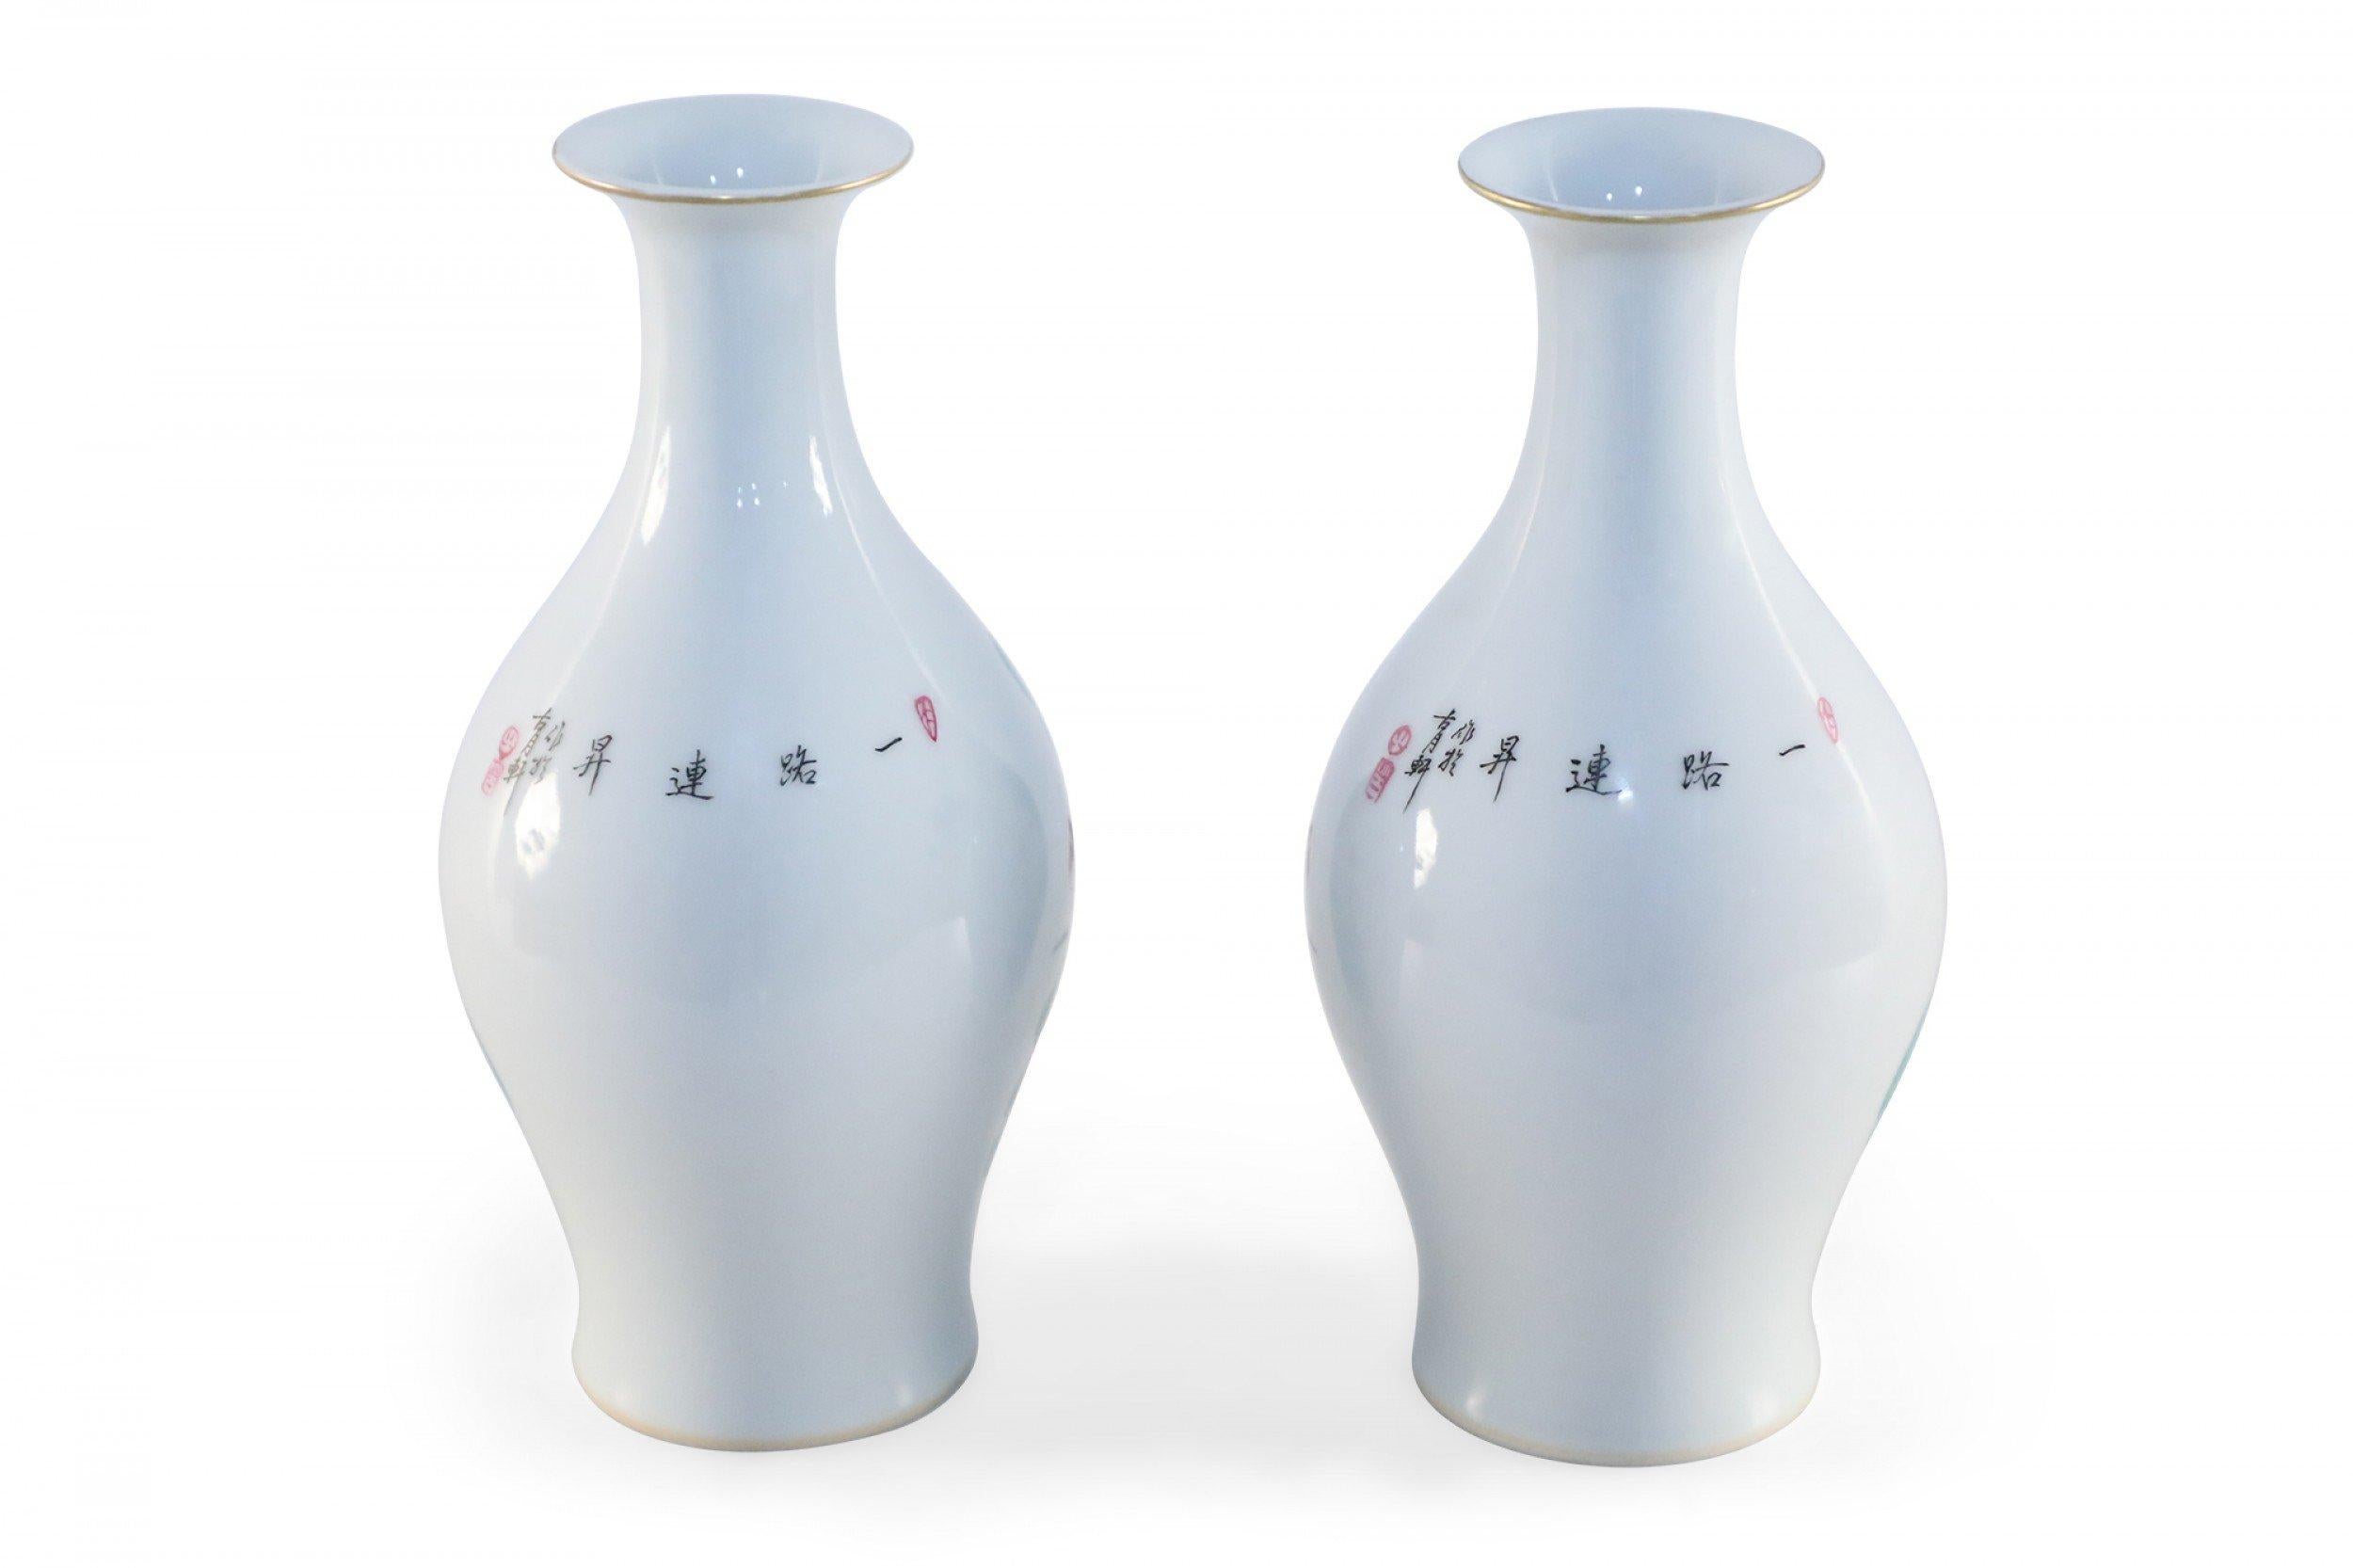 19th Century Pair of Chinese White Famille Rose Pear-Shaped Porcelain Vases